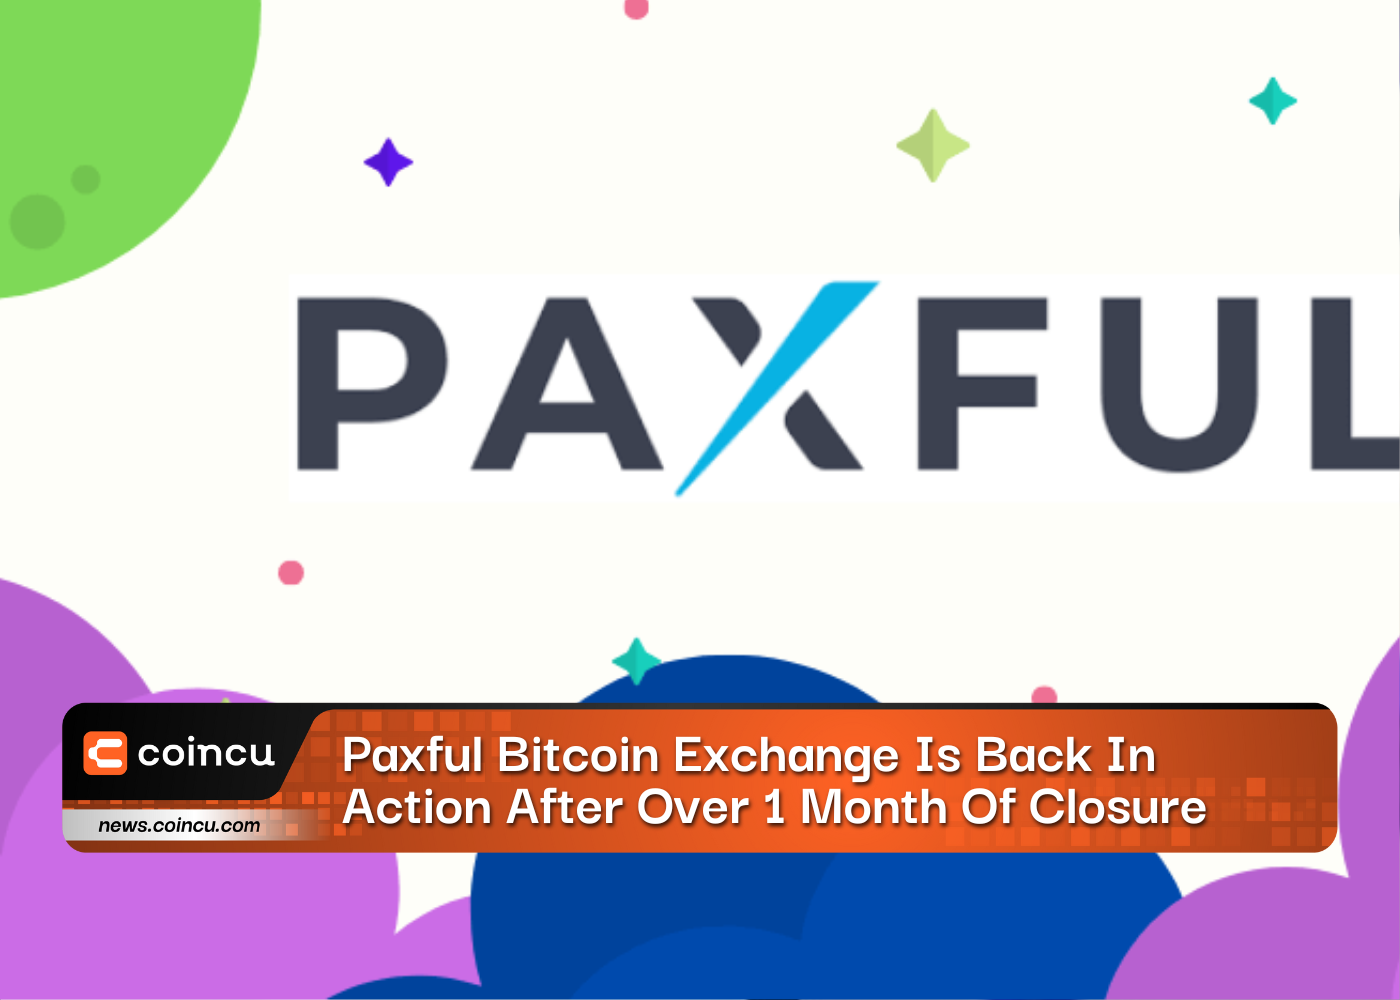 Paxful Bitcoin Exchange Is Back In Action After Over 1 Month Of Closure